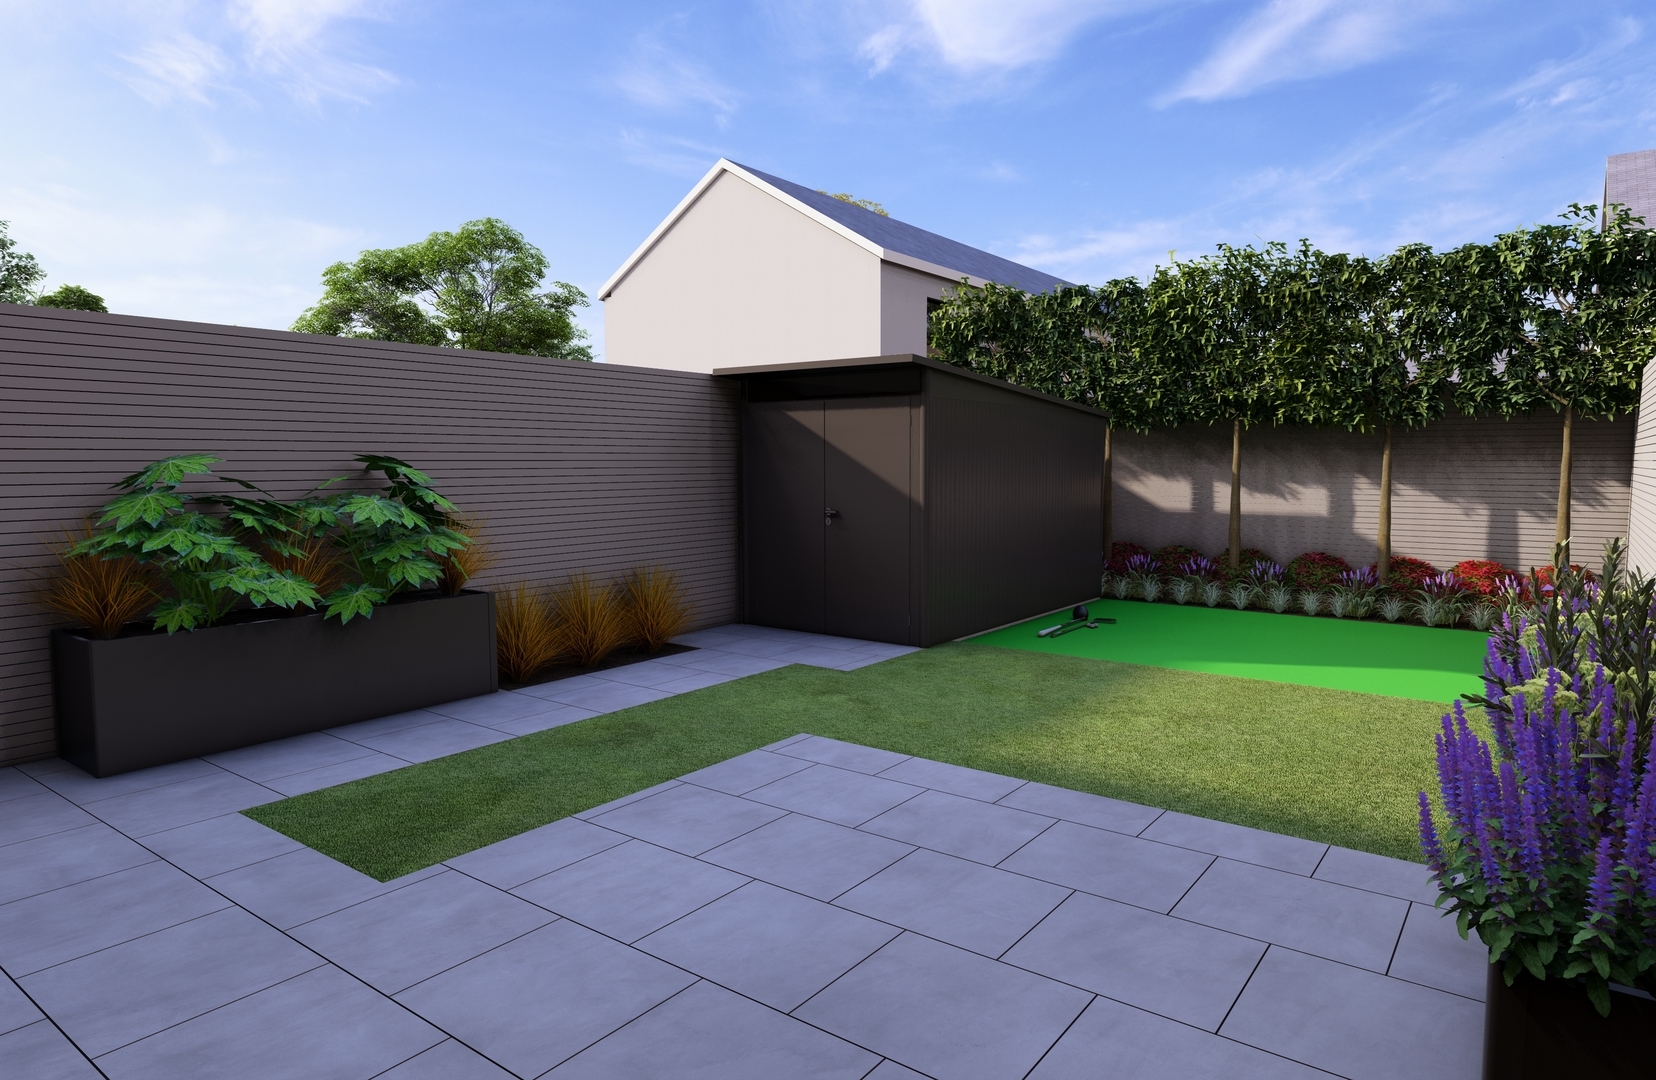 Garden Design for a modest size new low maintenance styled garden in Shankill, features Bespoke Horizontal timber slats with painted finish, Biohort AvantGarde Garden Shed & Biohort Belvedere Planters, specimen Pleached Evergreen Oak trees, a putting green, artificial lawn, colourful planting and limestone paving.